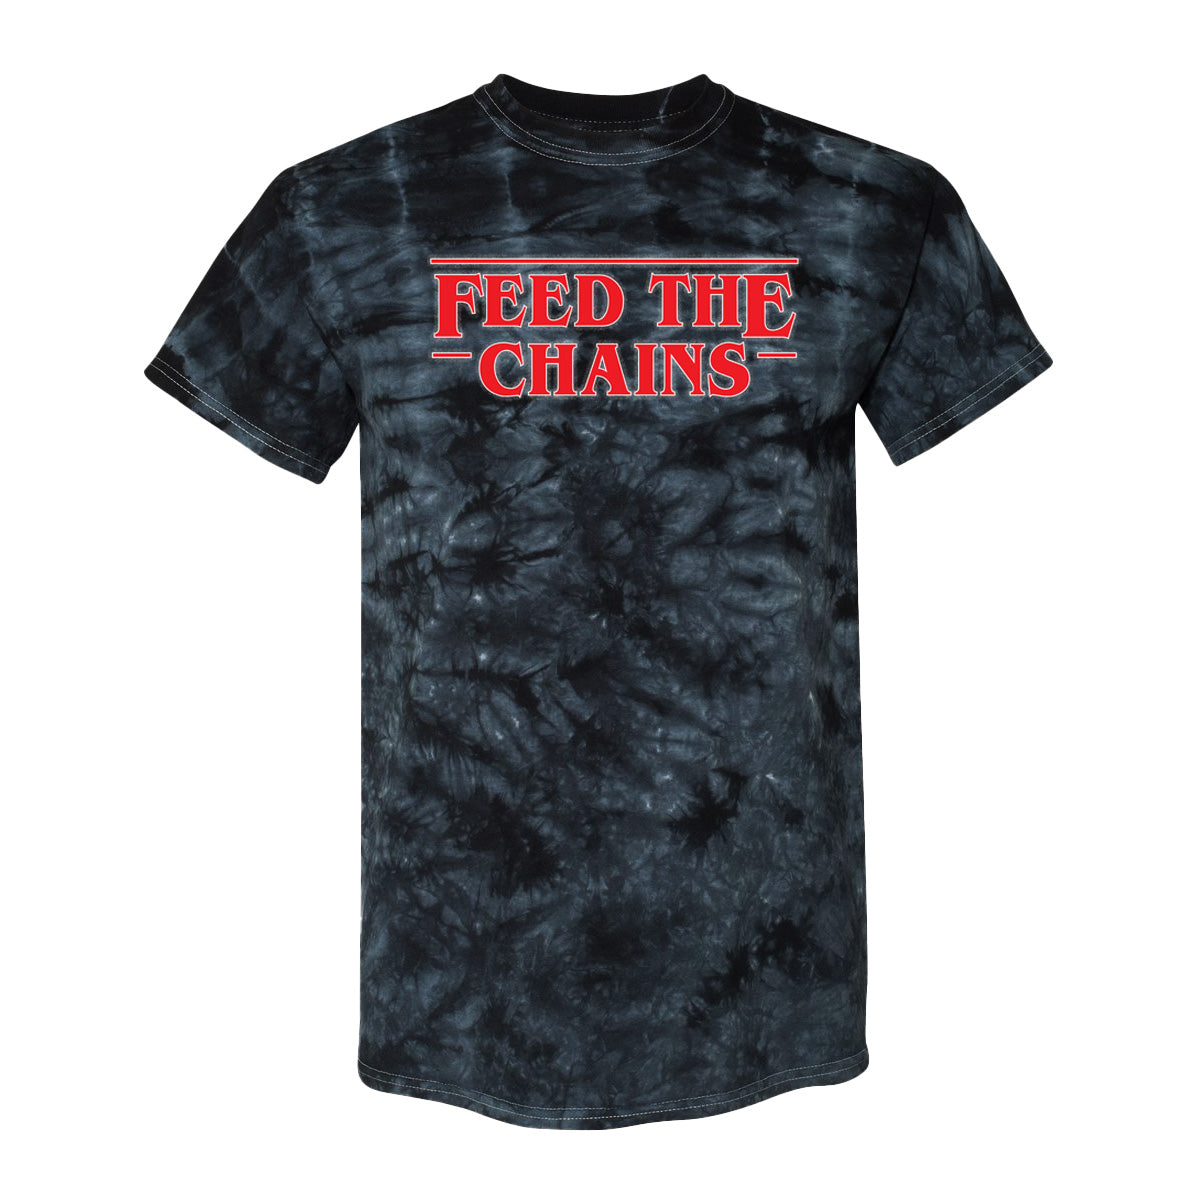 Feed the Chains Tee